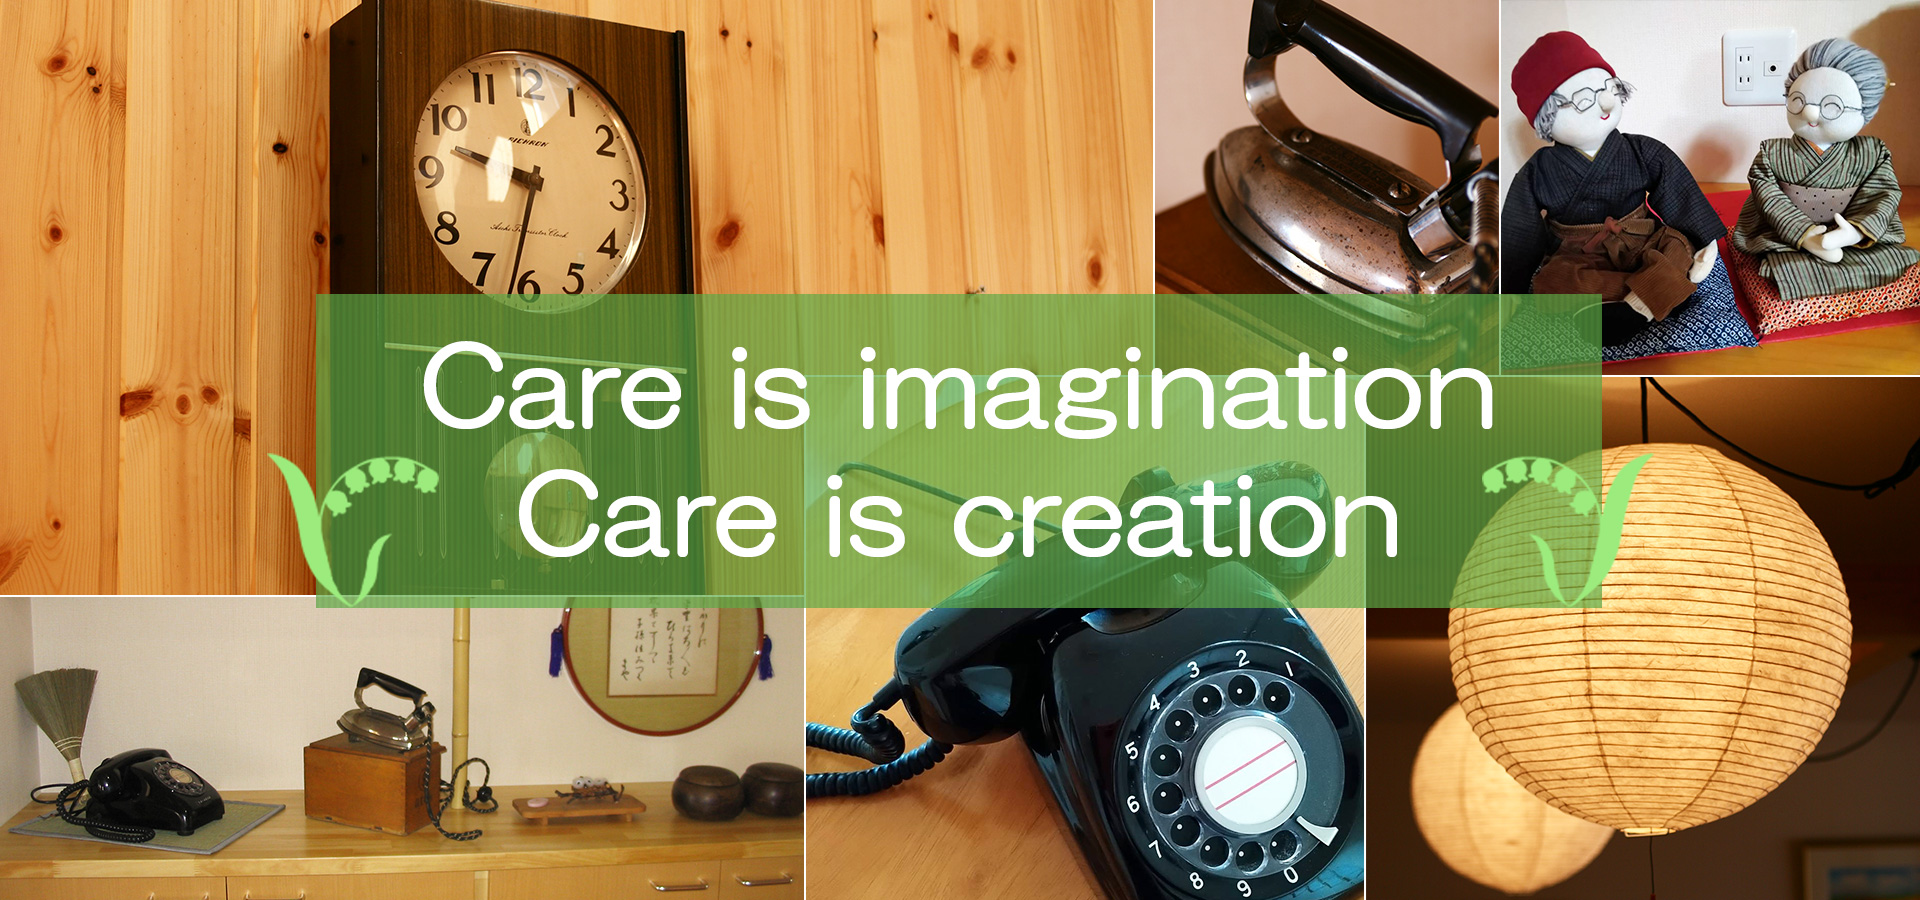 Care is imagination